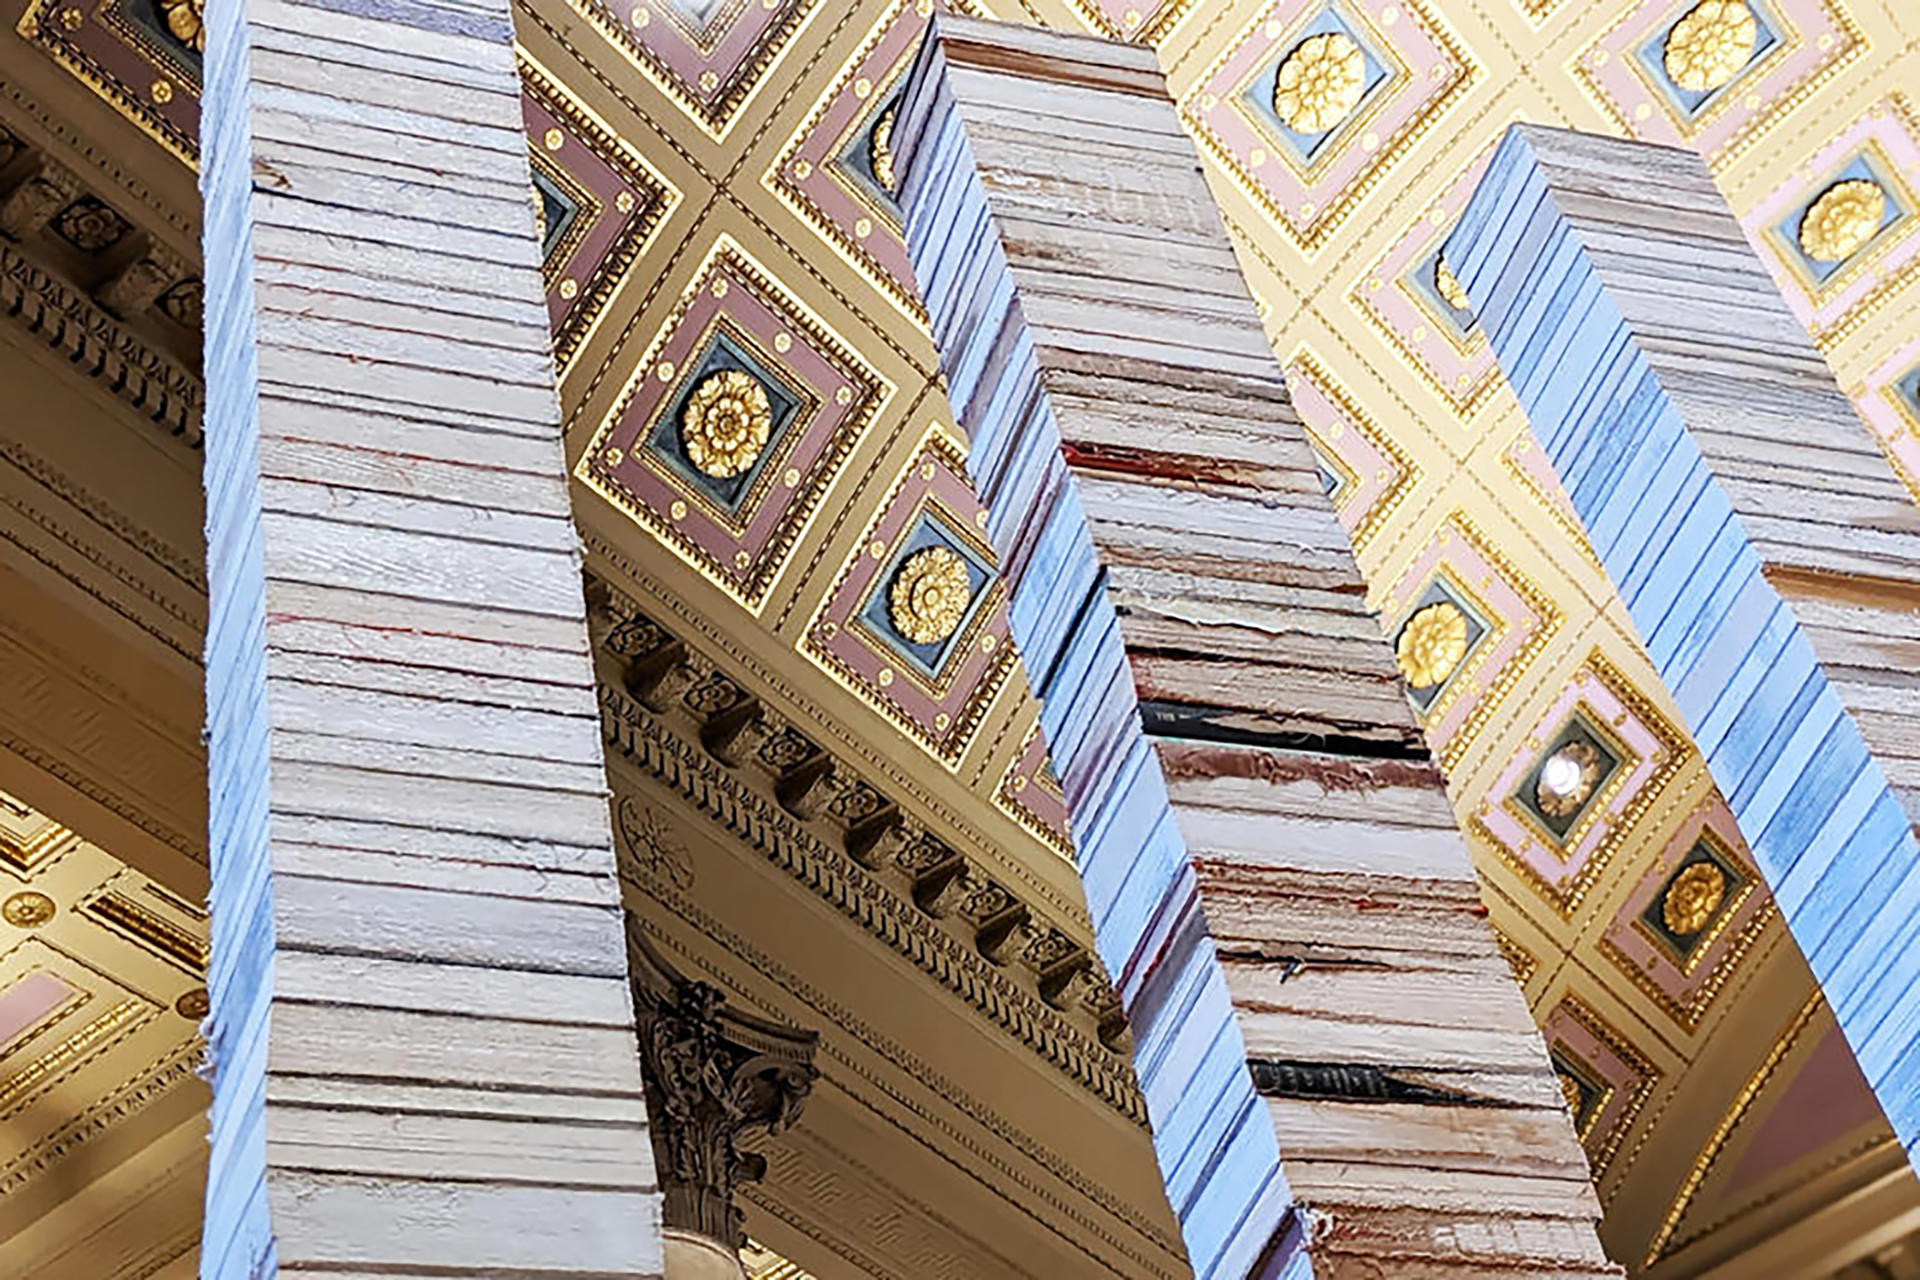 Three towering columns of stacked books reach towards an ornate golden ceiling.